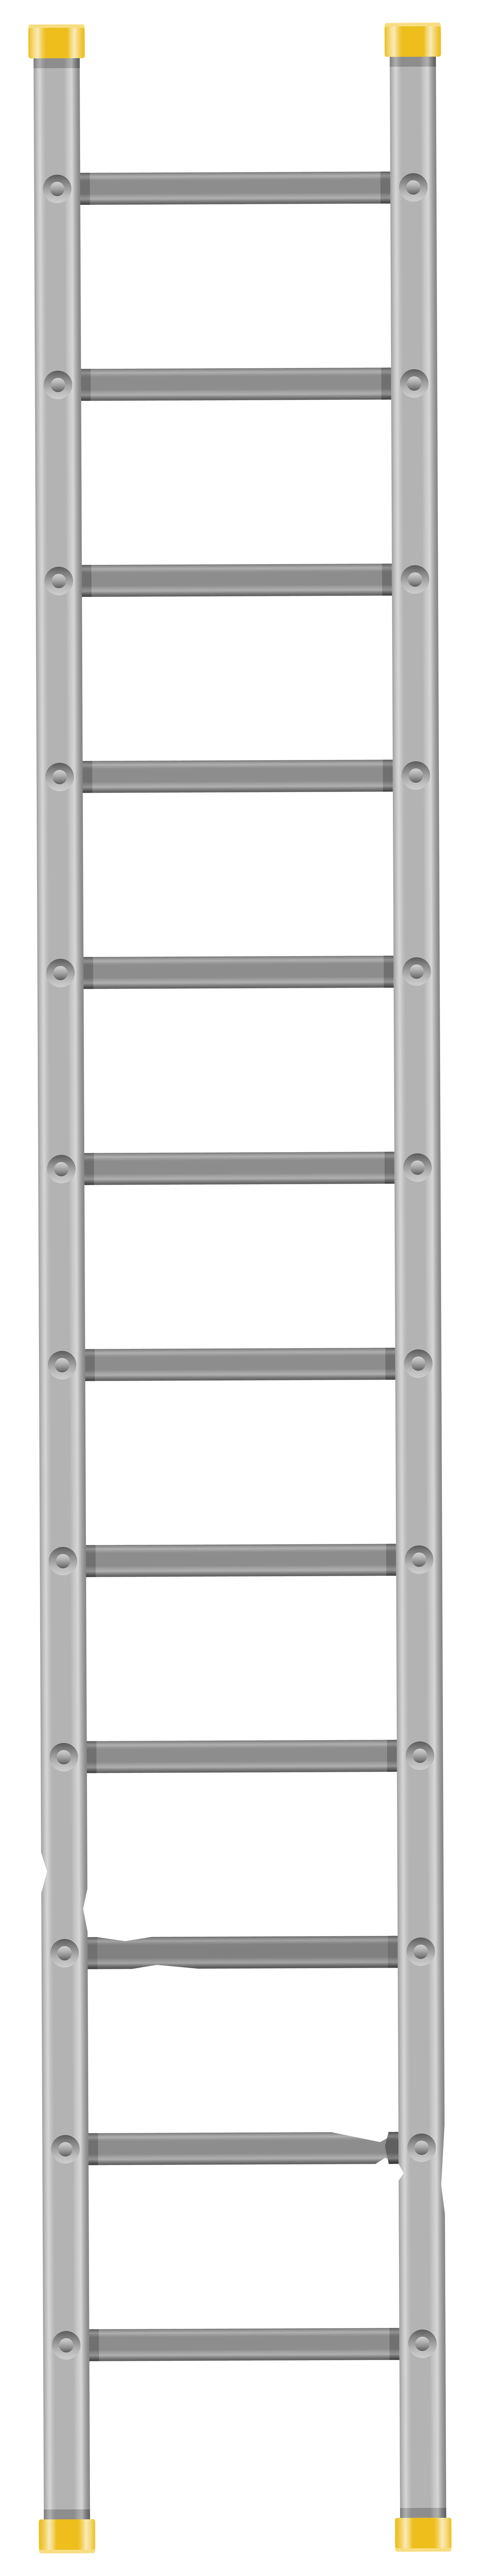 Avenue Conduit Objects Ladder Requirement PNG